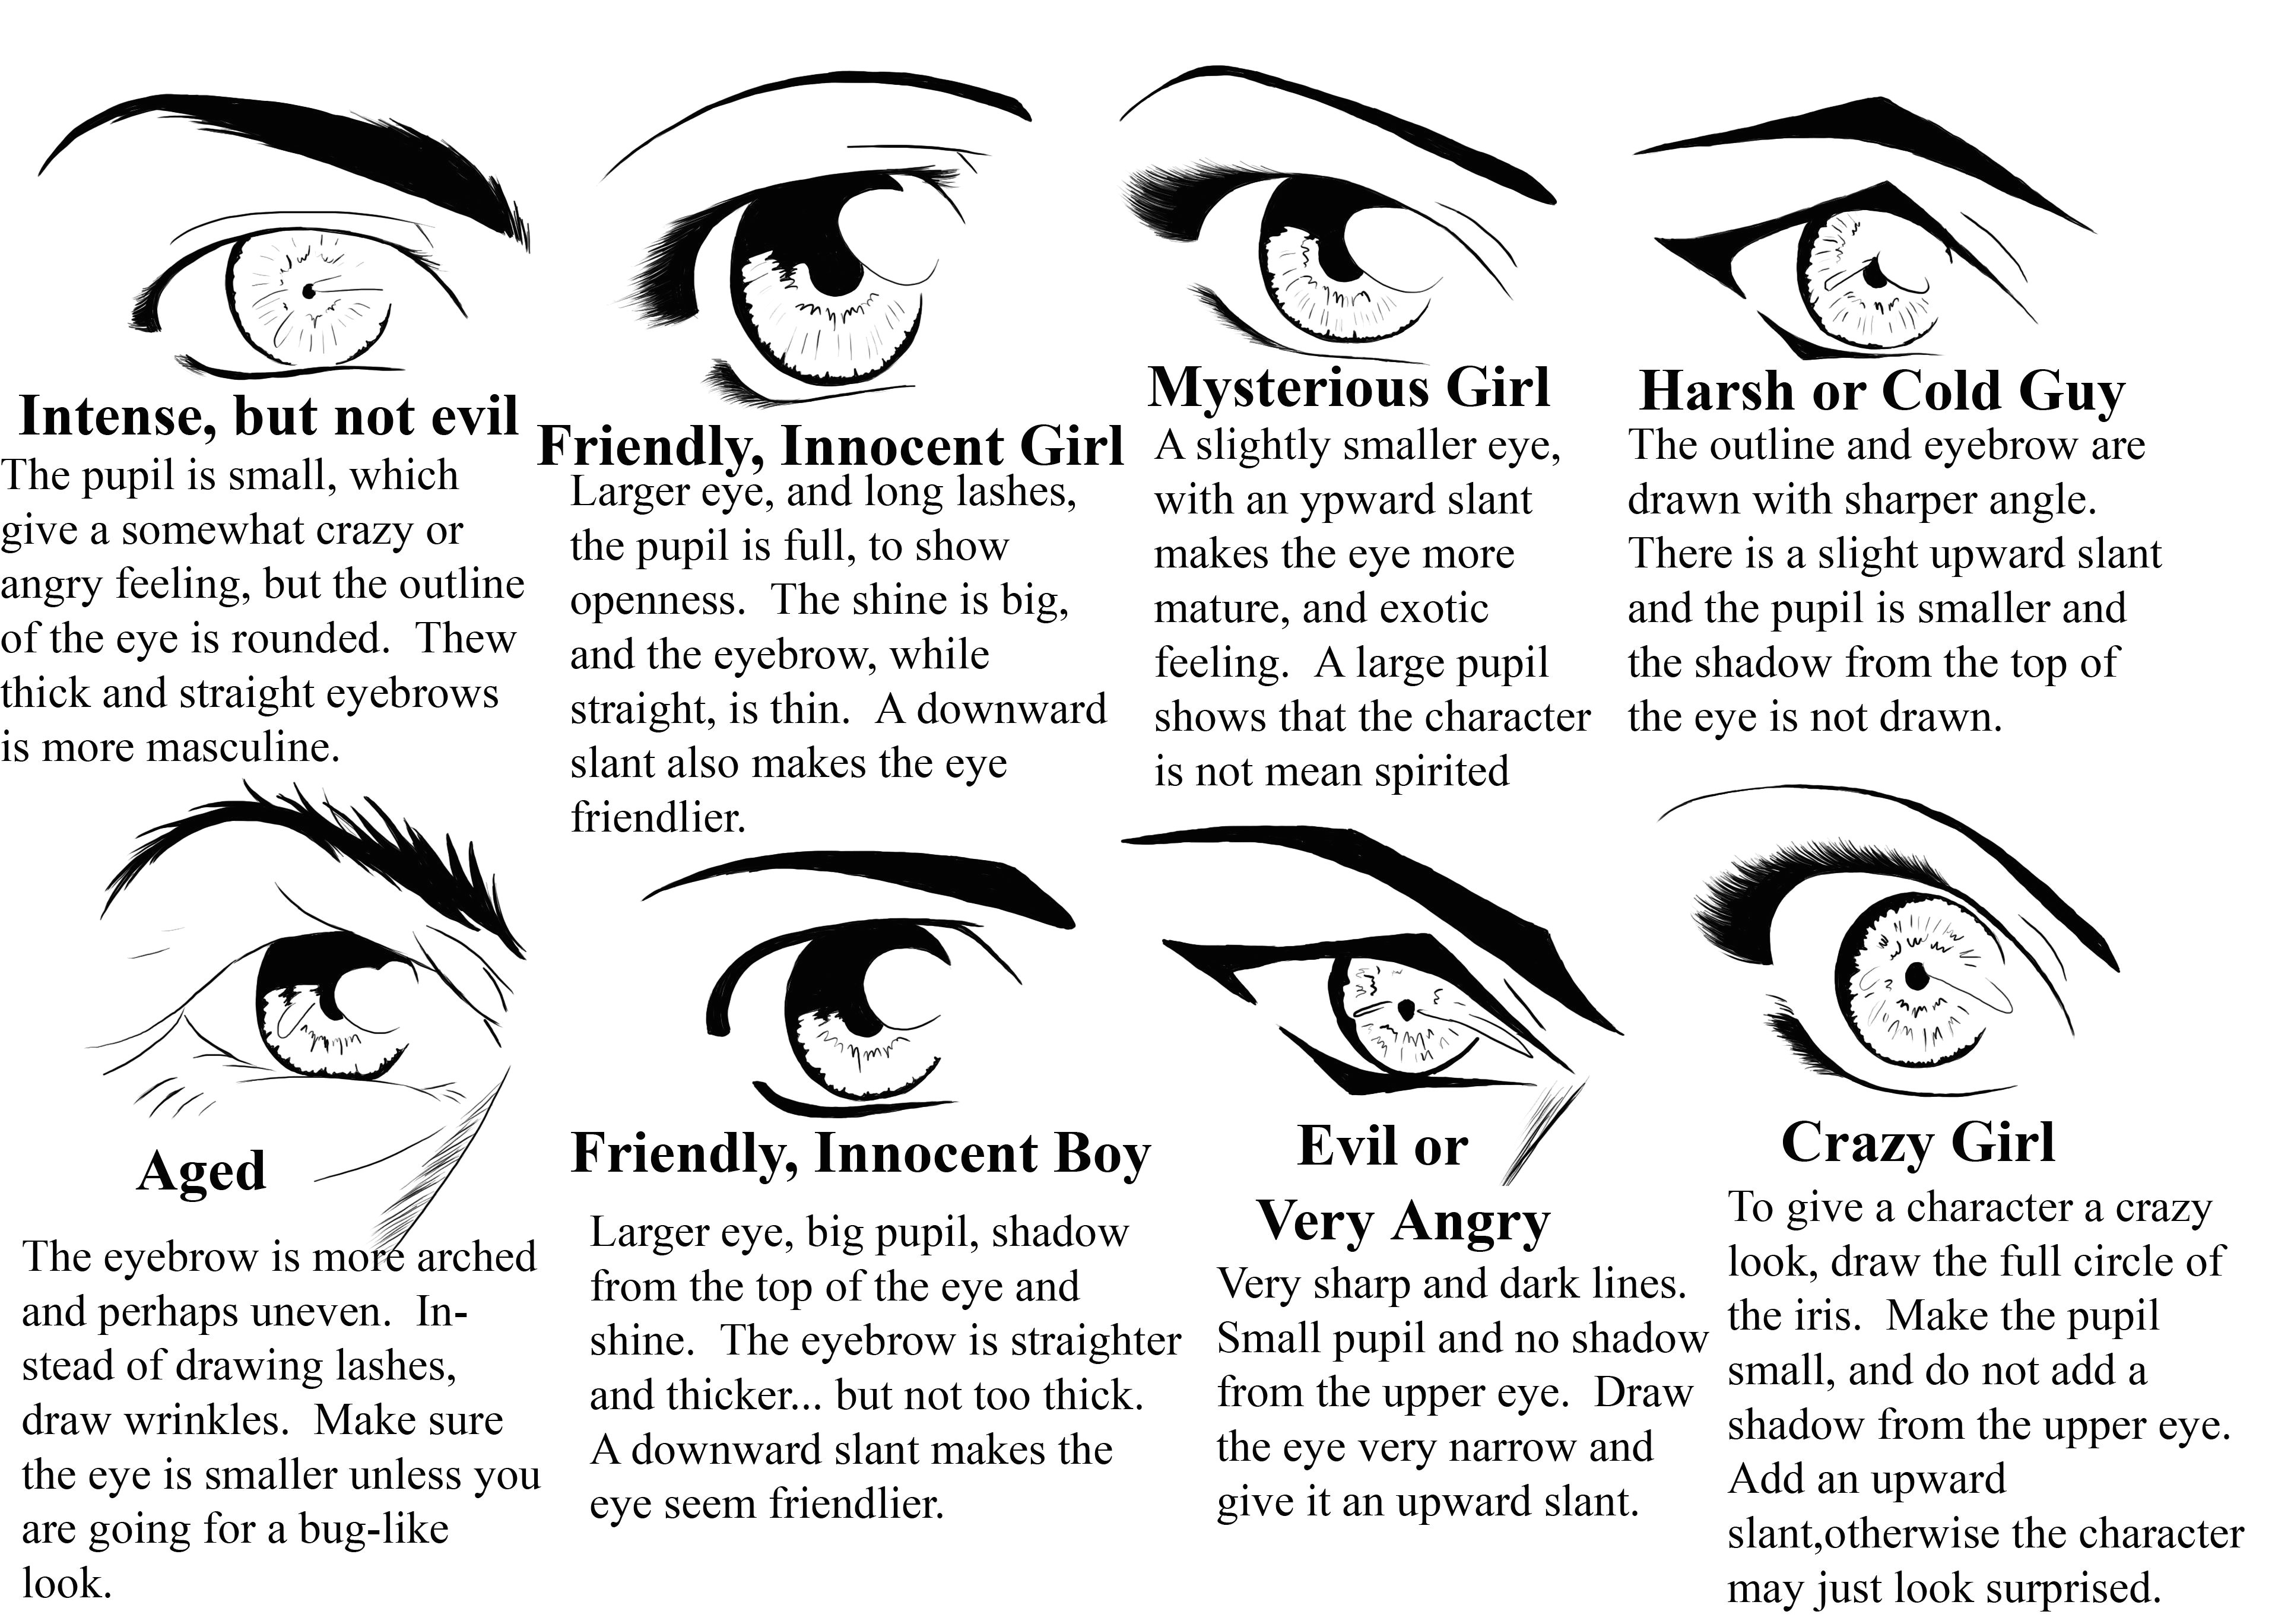 Drawing Eyes In Different Styles Pin by Rebeka Rolland On Art Tutorials In 2019 Drawings Anime